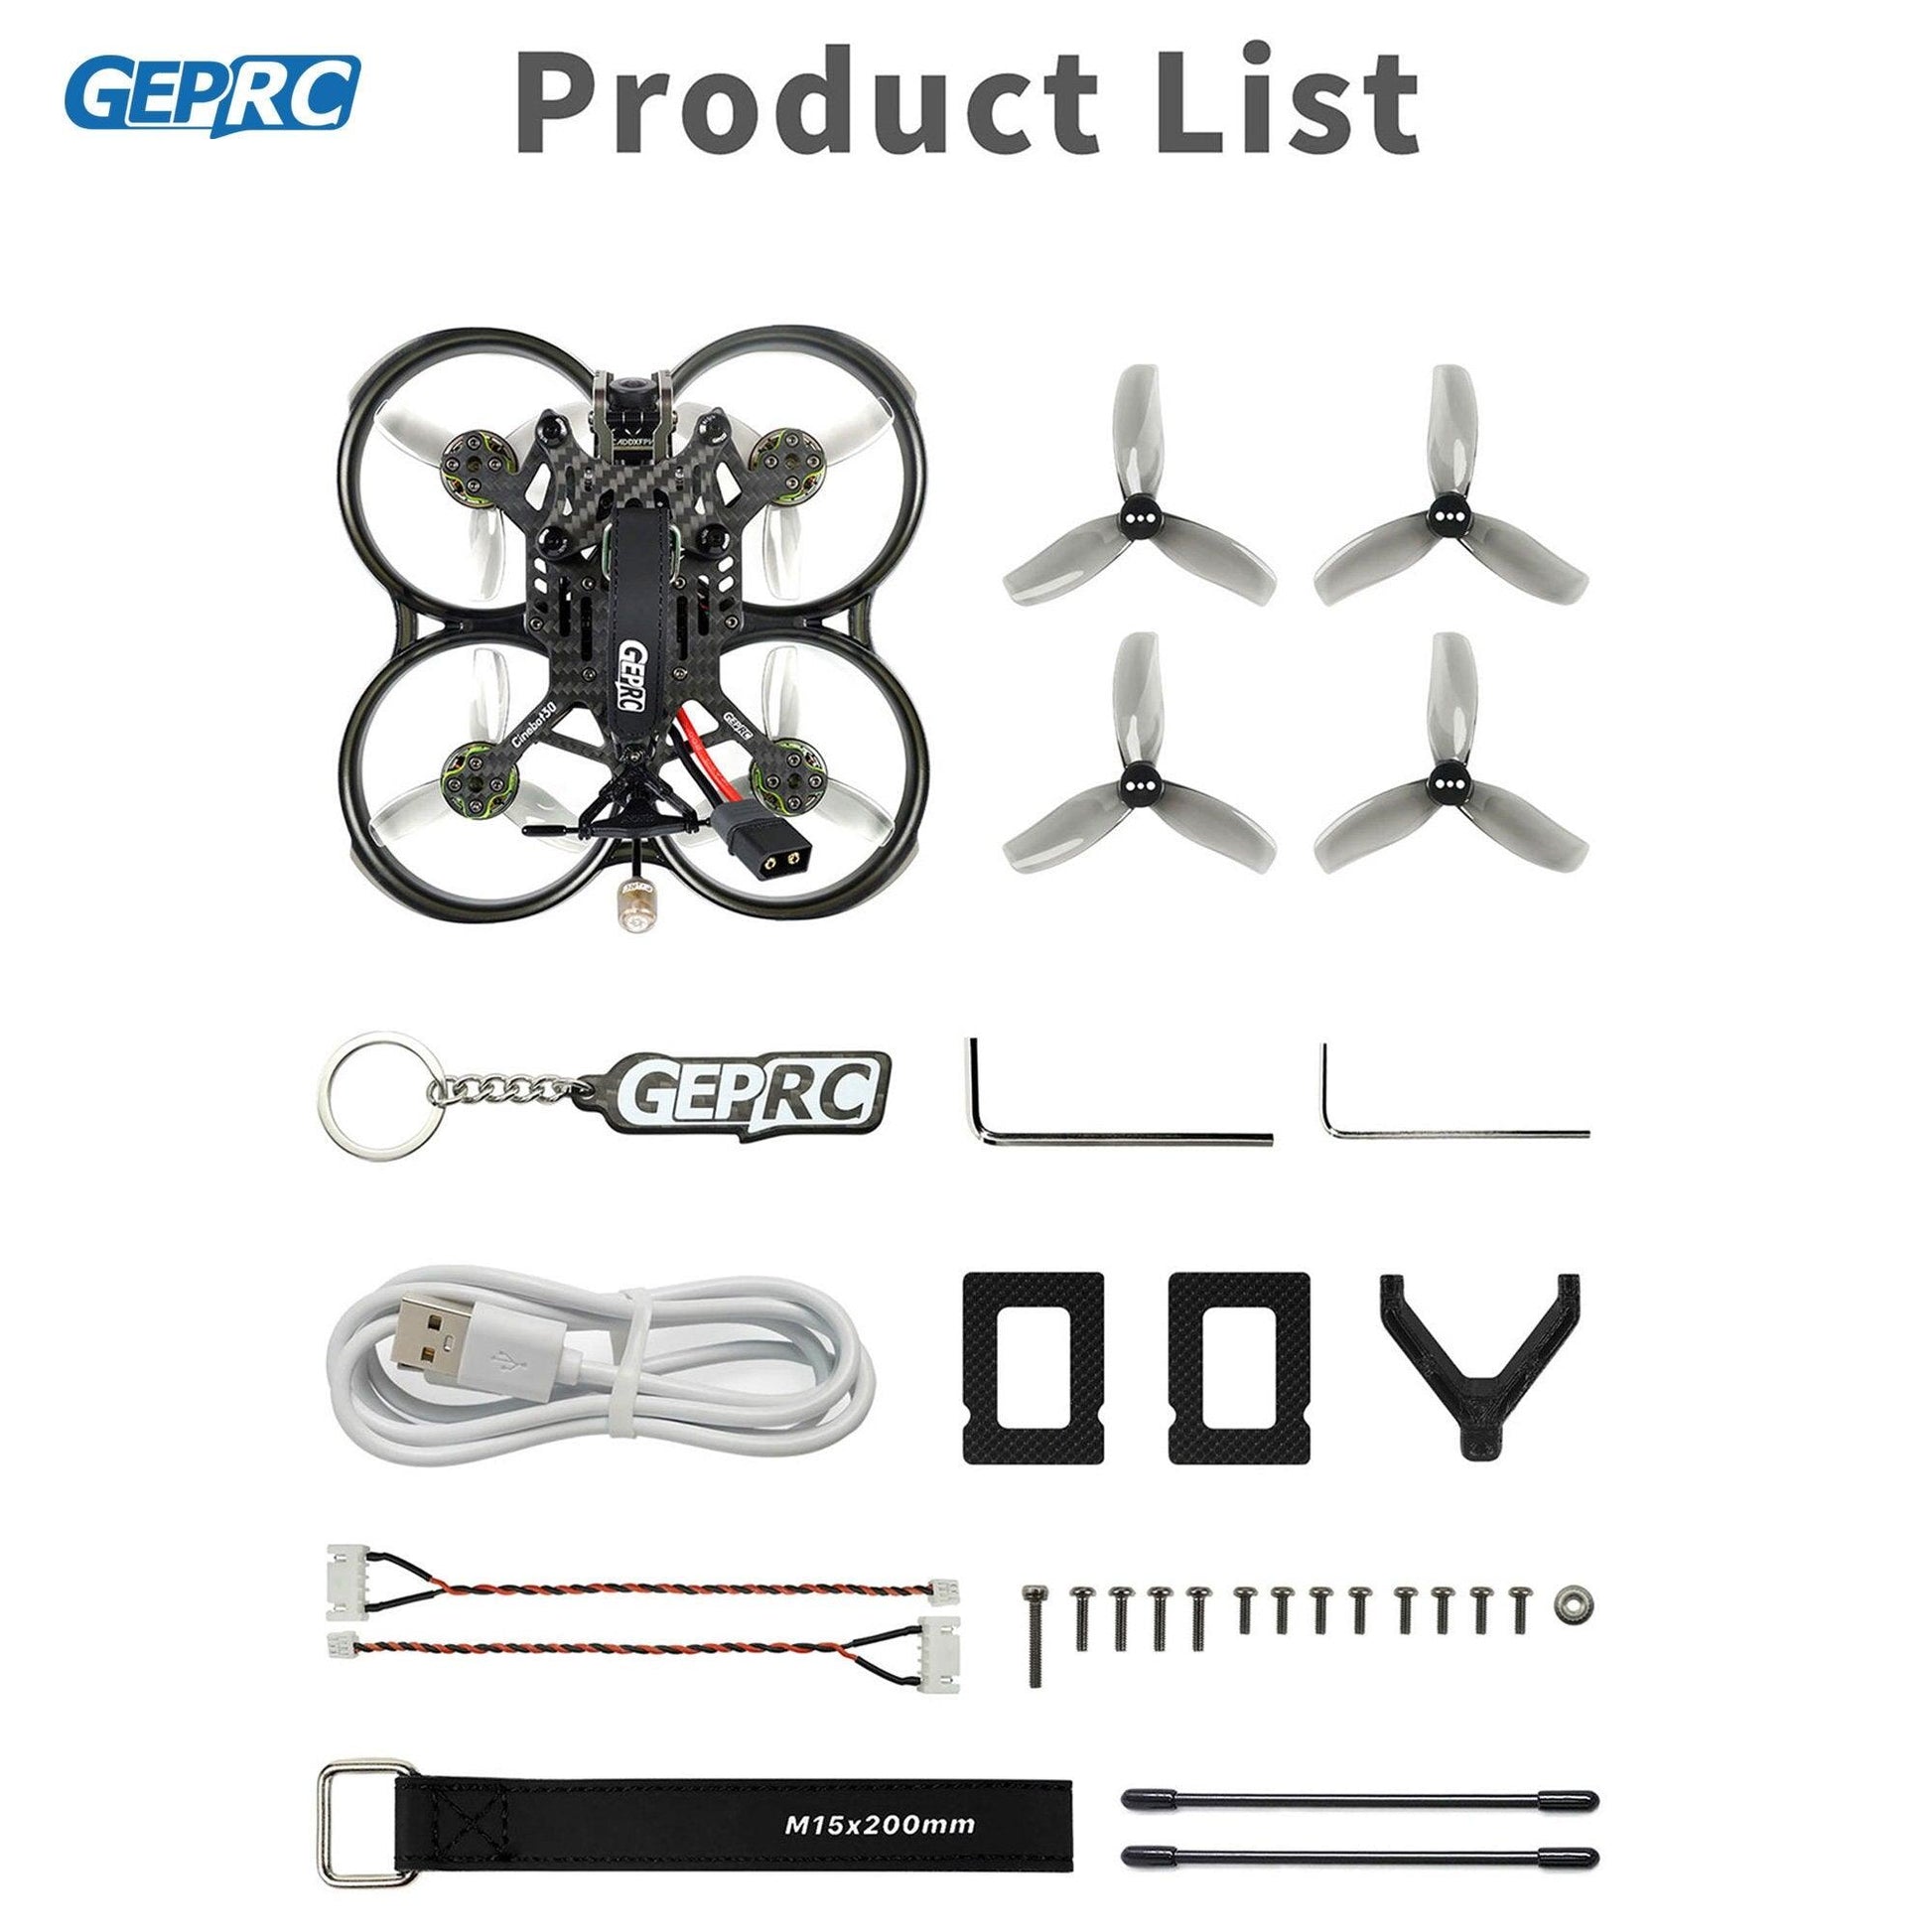 GEPRC Cinebot30 FPV Drone - Analog 4S 6S Ultralight FPV Racing Drone TBS Nano RX / Caddx Ratel 2 GEP-F722-45A AlO V2 for RC FPV Quadcopter - RCDrone